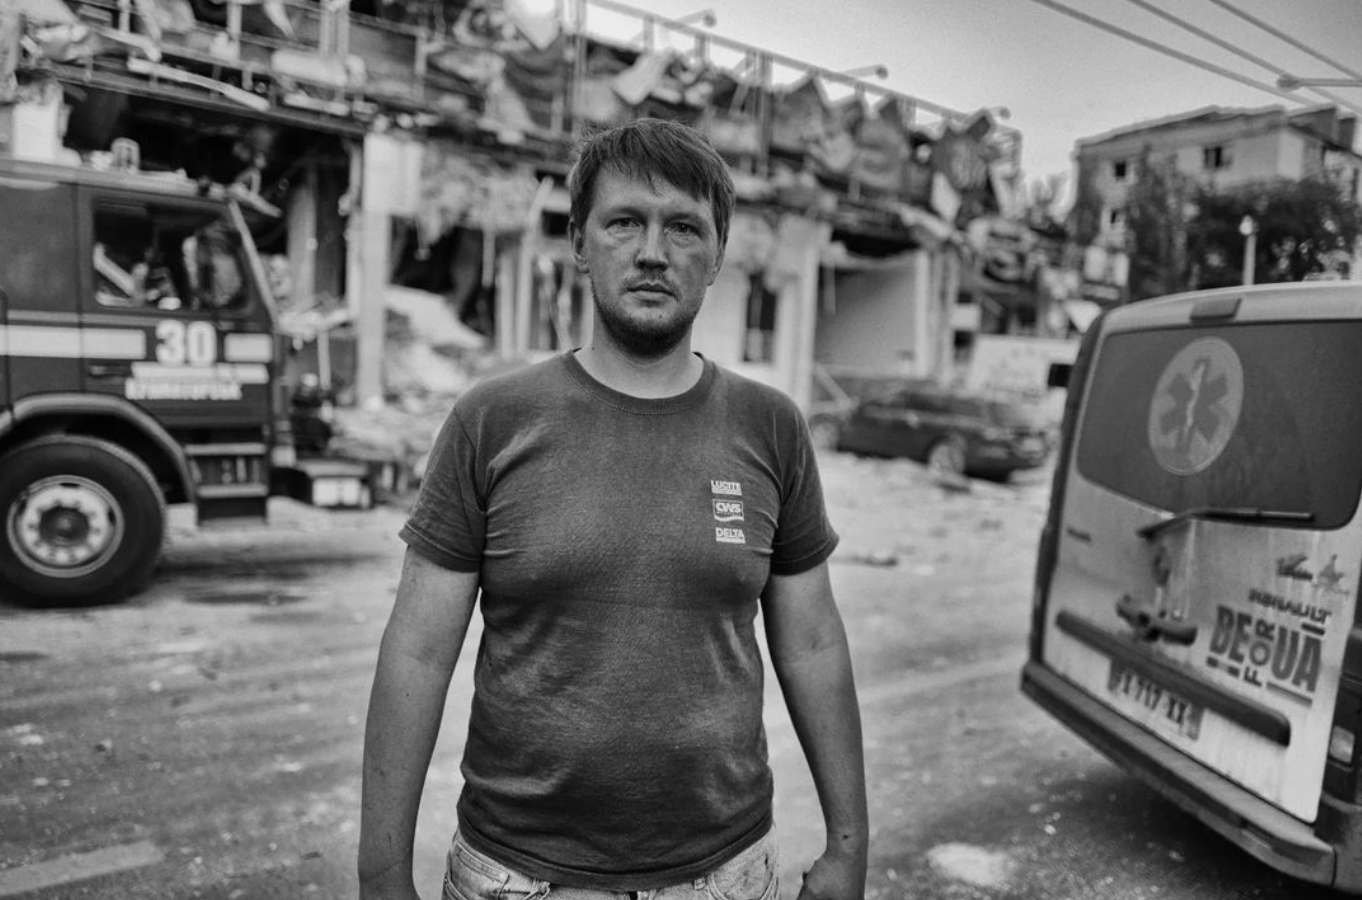 Dmytro Kovalchuk after the explosion of a Russian missile in Kramatorsk 27th June 2023 Source: Dmytro Kovalchuk's Instagram profile